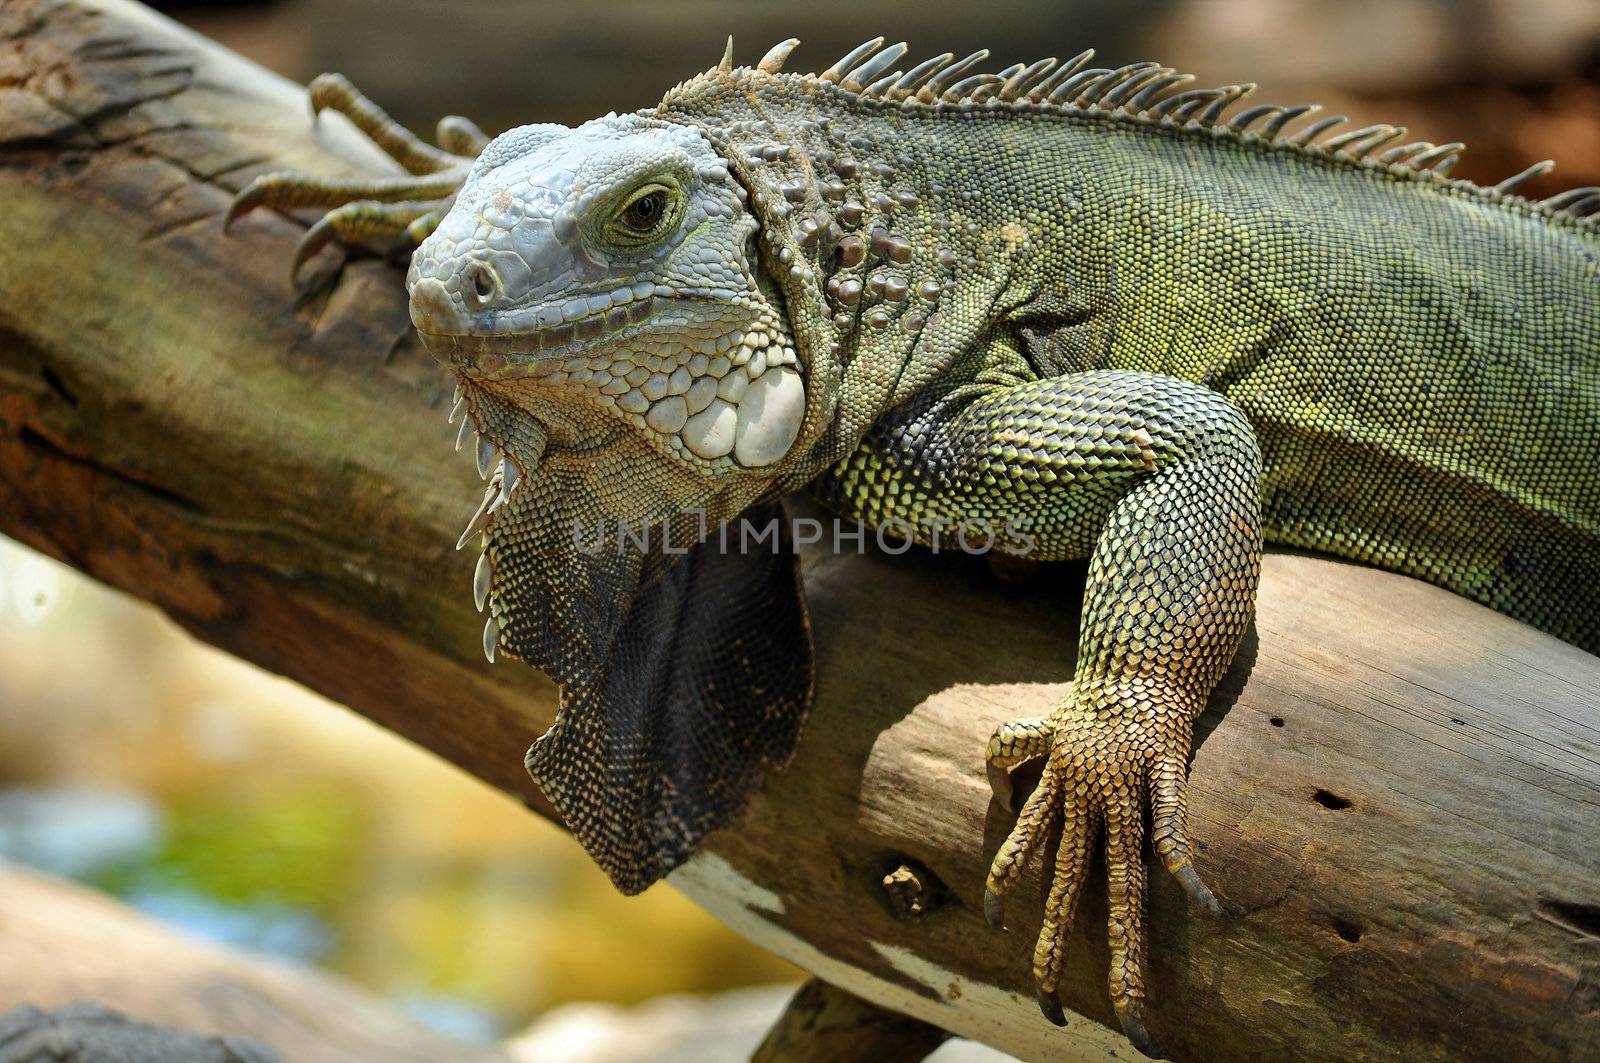 The green iguana ranges over a large geographic area, from southern Brazil and Paraguay to as far north as Mexico and the Caribbean Islands; and in the United States as feral populations in South Florida, Hawaii, and the Rio Grande Valley of Texas.